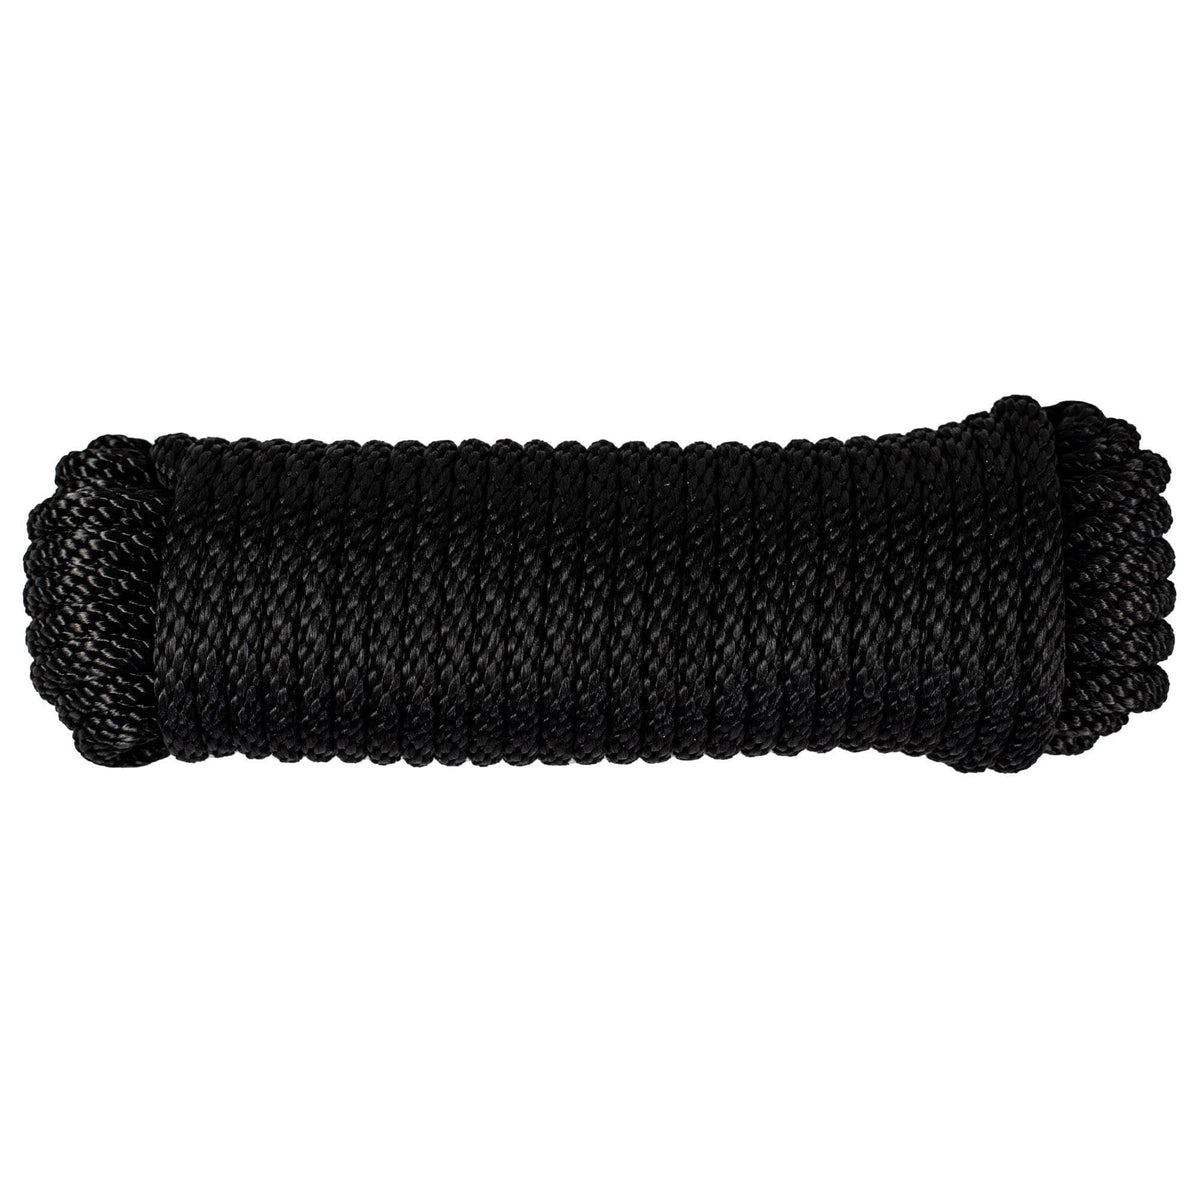 1/2 inch Black Polyester Rope - 250 Foot Spool